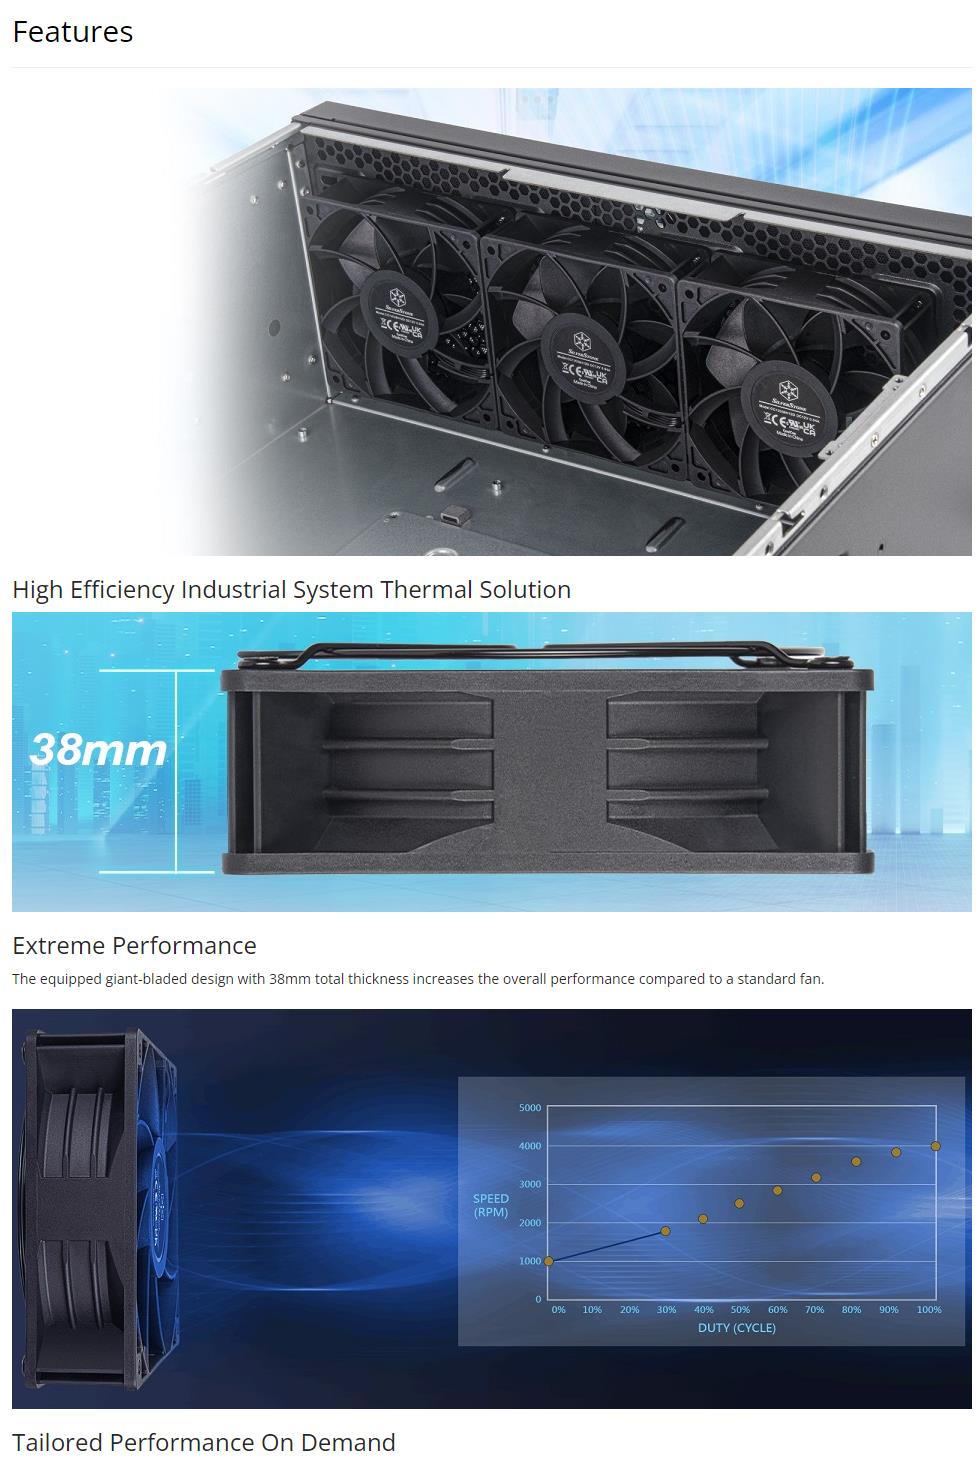 A large marketing image providing additional information about the product SilverStone FHS 120X High Performance 120mm PWM Industrial Cooling Fan - Additional alt info not provided